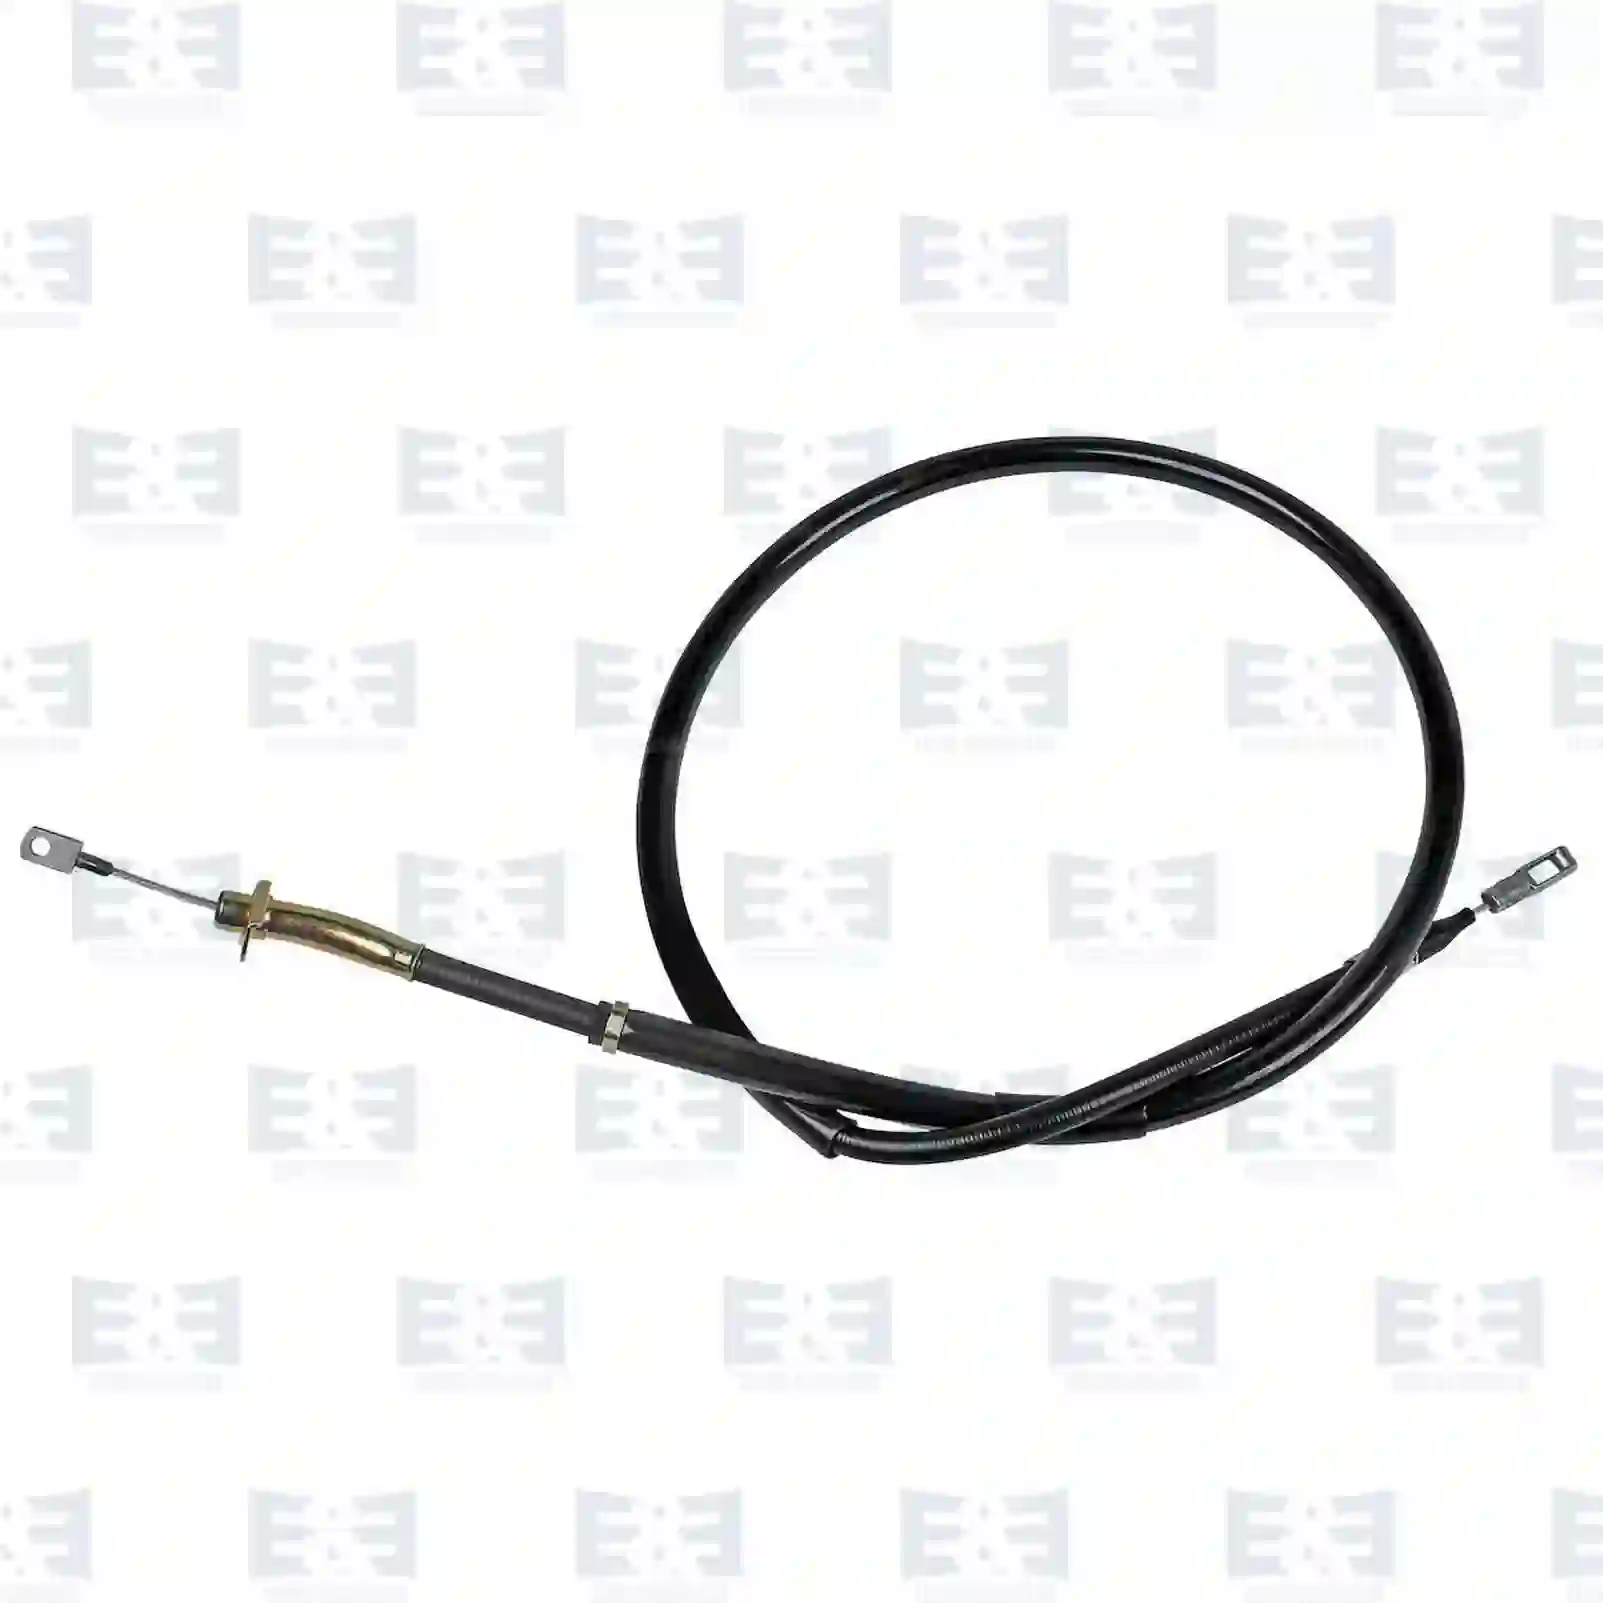 Control wire, parking brake, 2E2295691, 5139227AA, 9044200285, 2D0606722, 2D0609722, 2D0609722A, ZG50367-0008 ||  2E2295691 E&E Truck Spare Parts | Truck Spare Parts, Auotomotive Spare Parts Control wire, parking brake, 2E2295691, 5139227AA, 9044200285, 2D0606722, 2D0609722, 2D0609722A, ZG50367-0008 ||  2E2295691 E&E Truck Spare Parts | Truck Spare Parts, Auotomotive Spare Parts